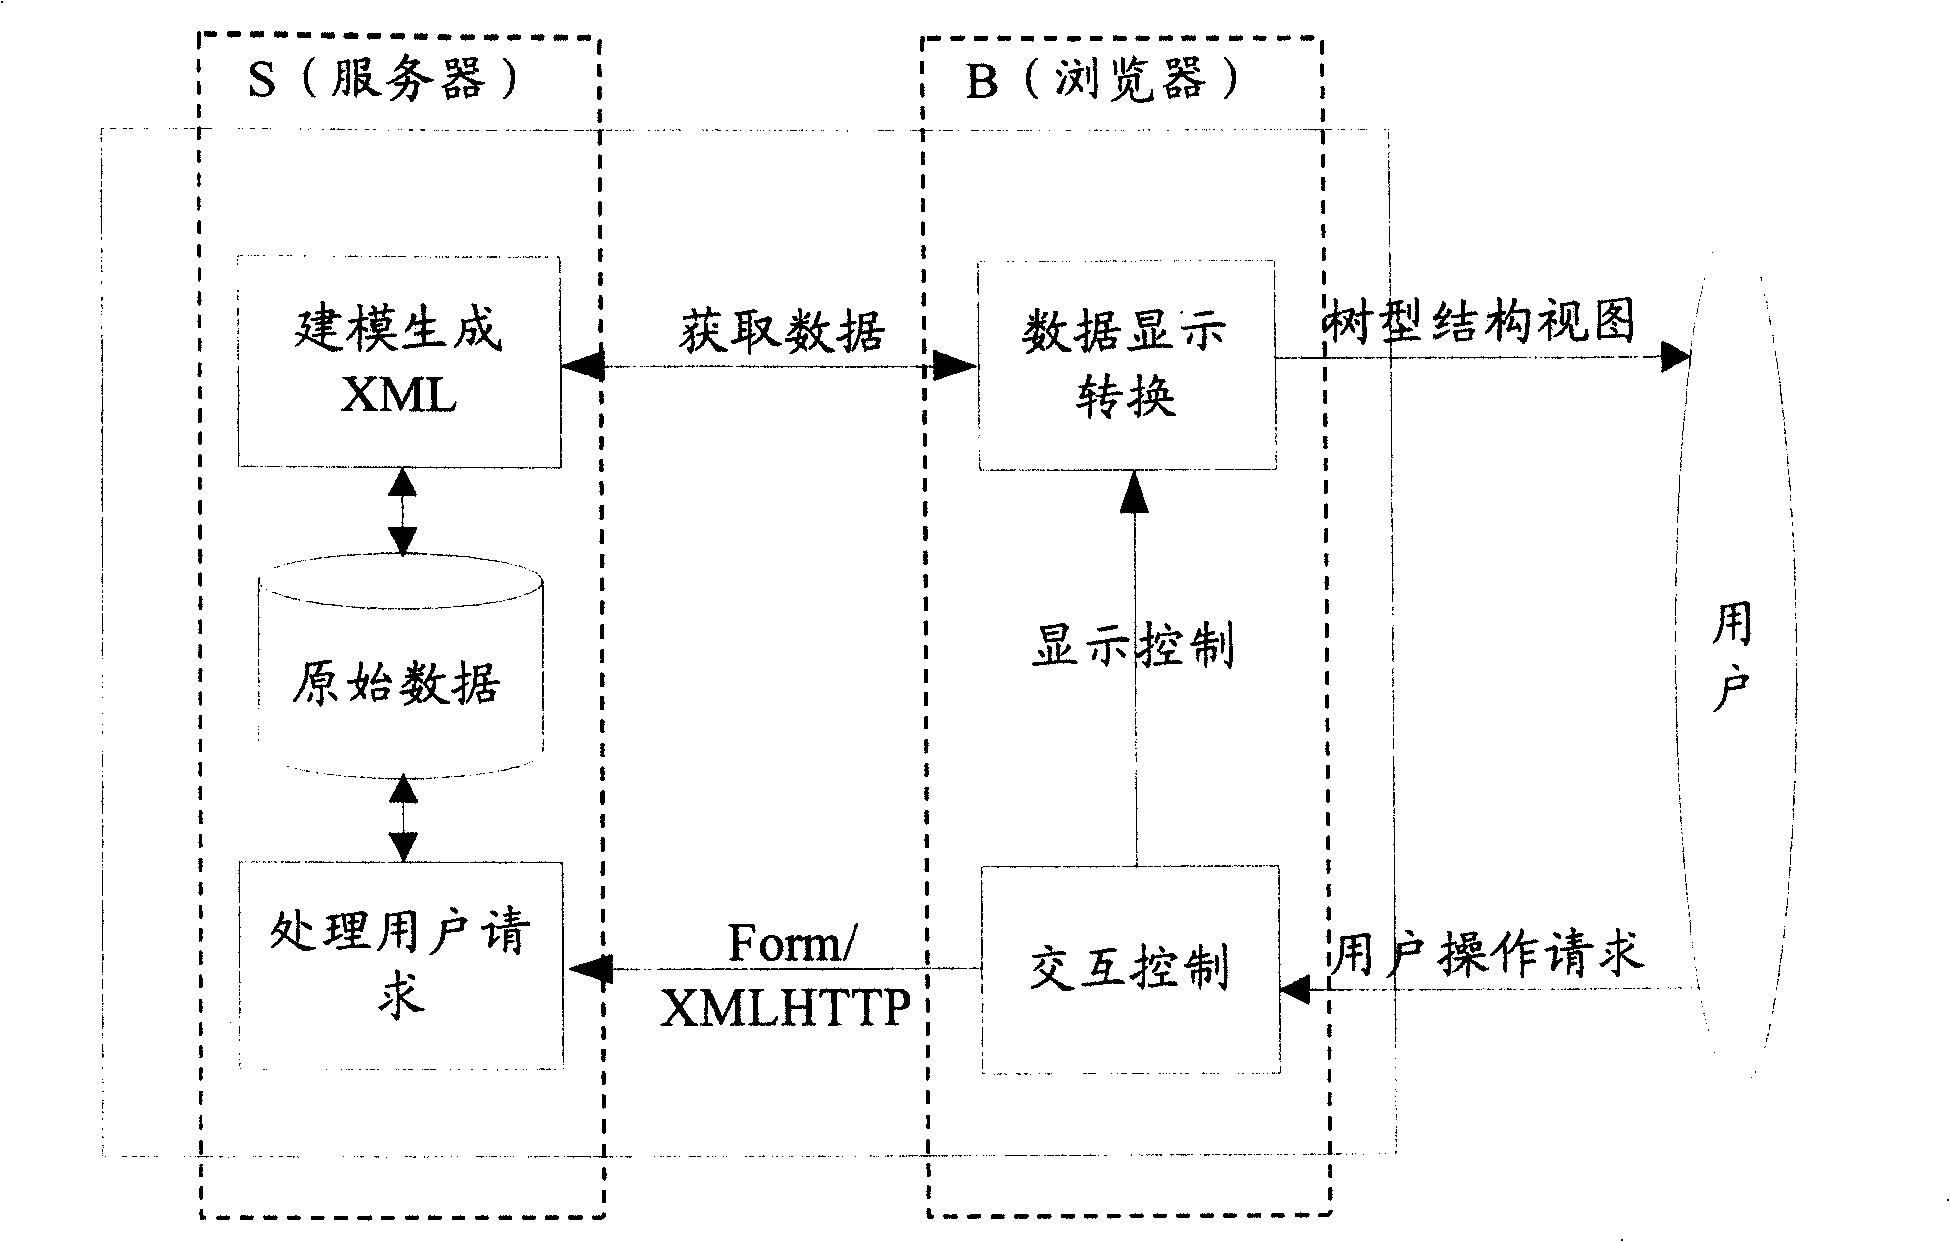 Method and system for demonstrating data by tree-mode structure